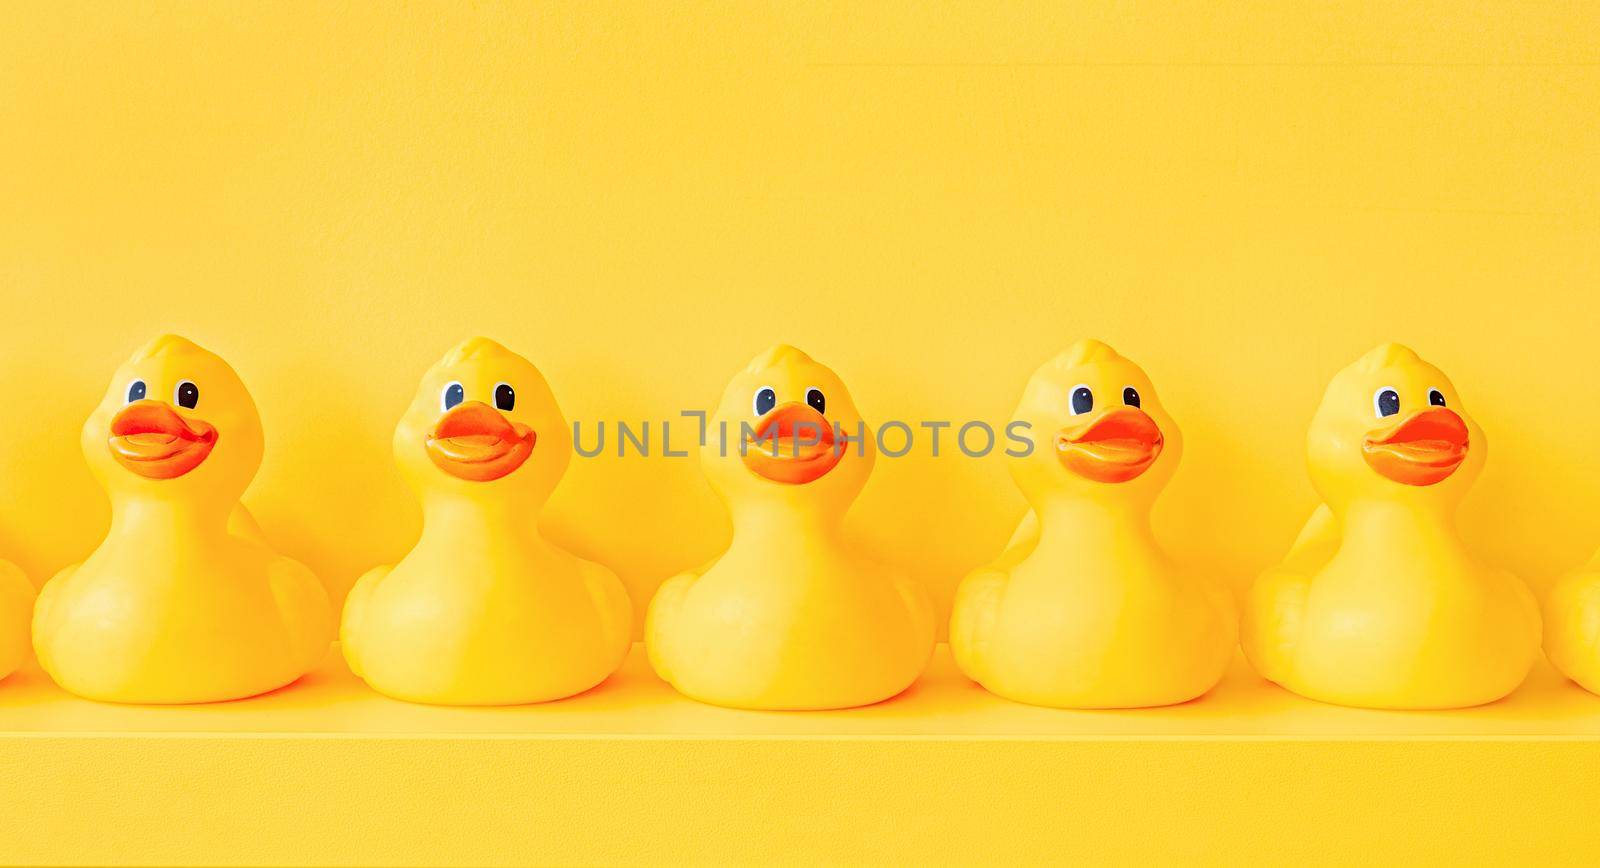 Design yellow rubber ducks in a line toy design shelf decor. Rubber ducky bath toy background yellow ducks in a row. Communication. Community. Association. Organize. Rubber duck pattern yellow concept